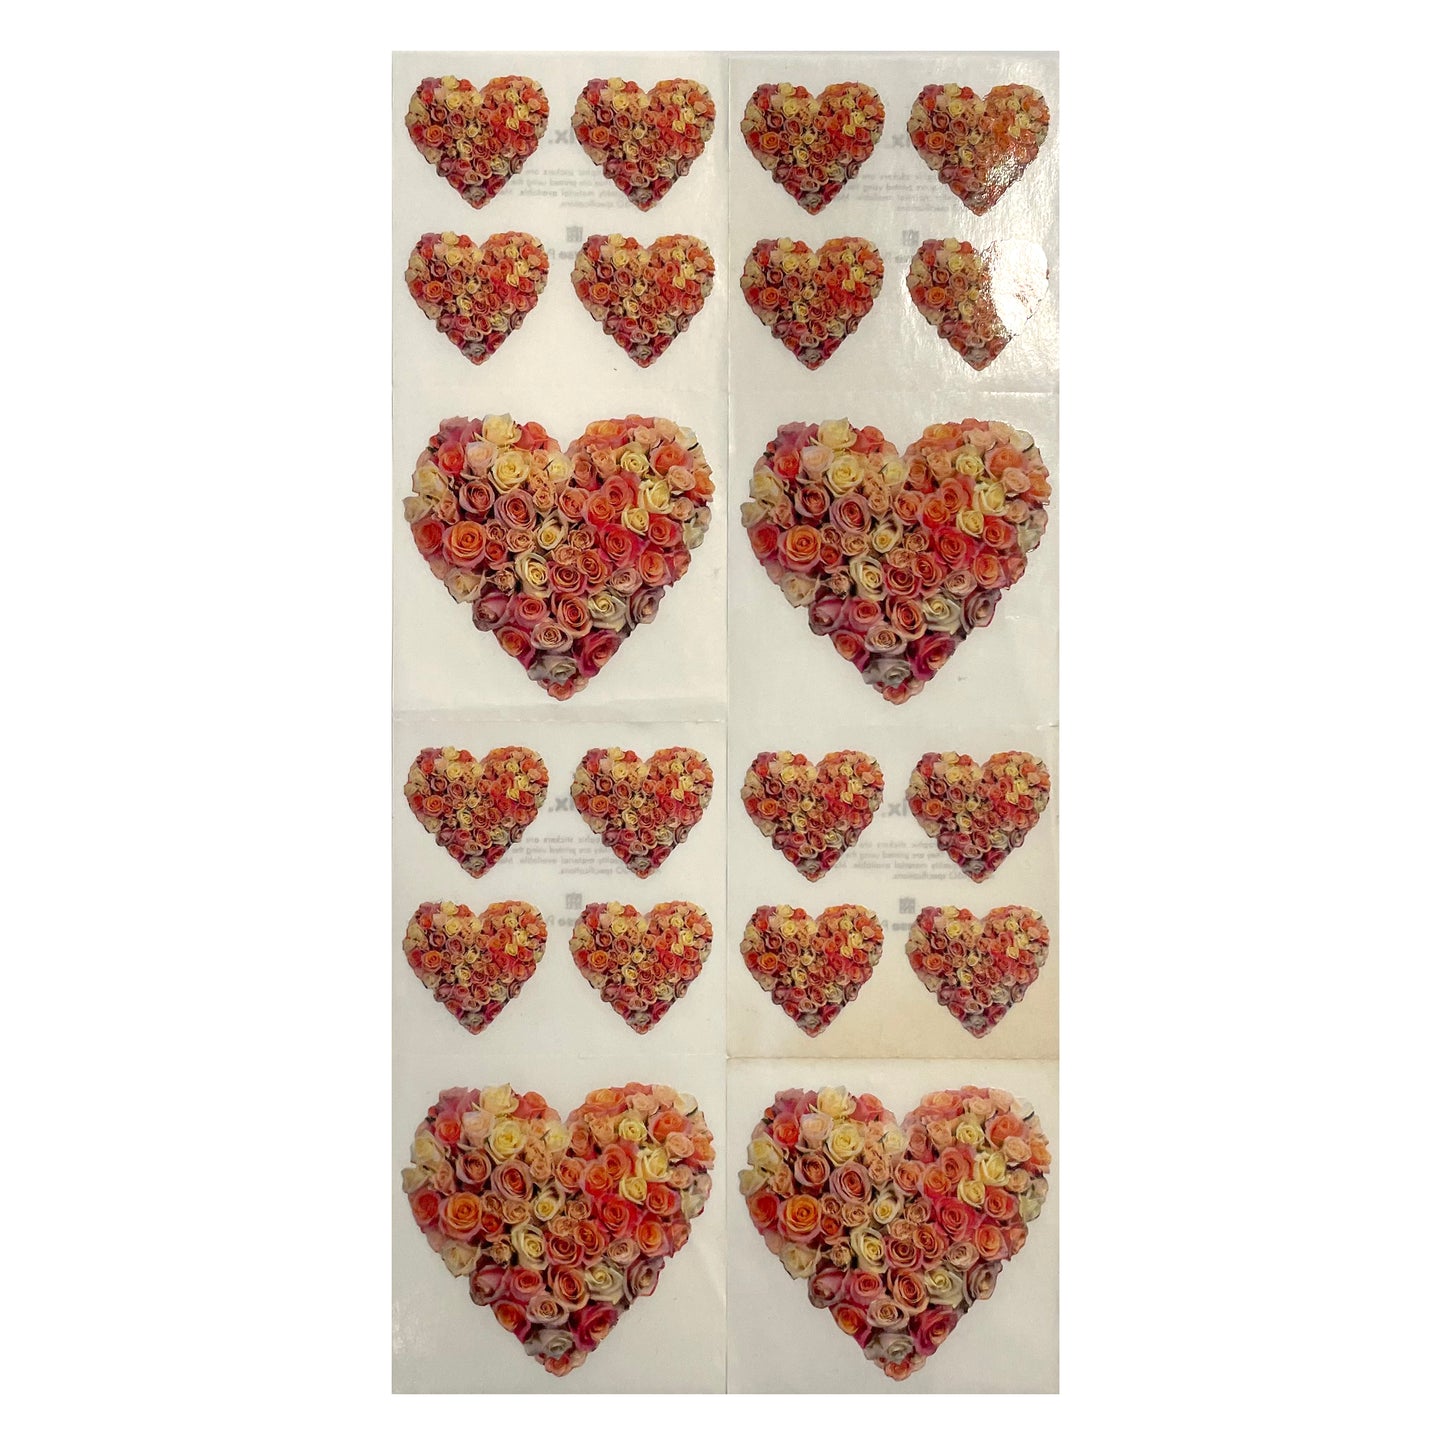 Paper House: Photoreal Roses in Heart Shape Stickers - 8 pcs